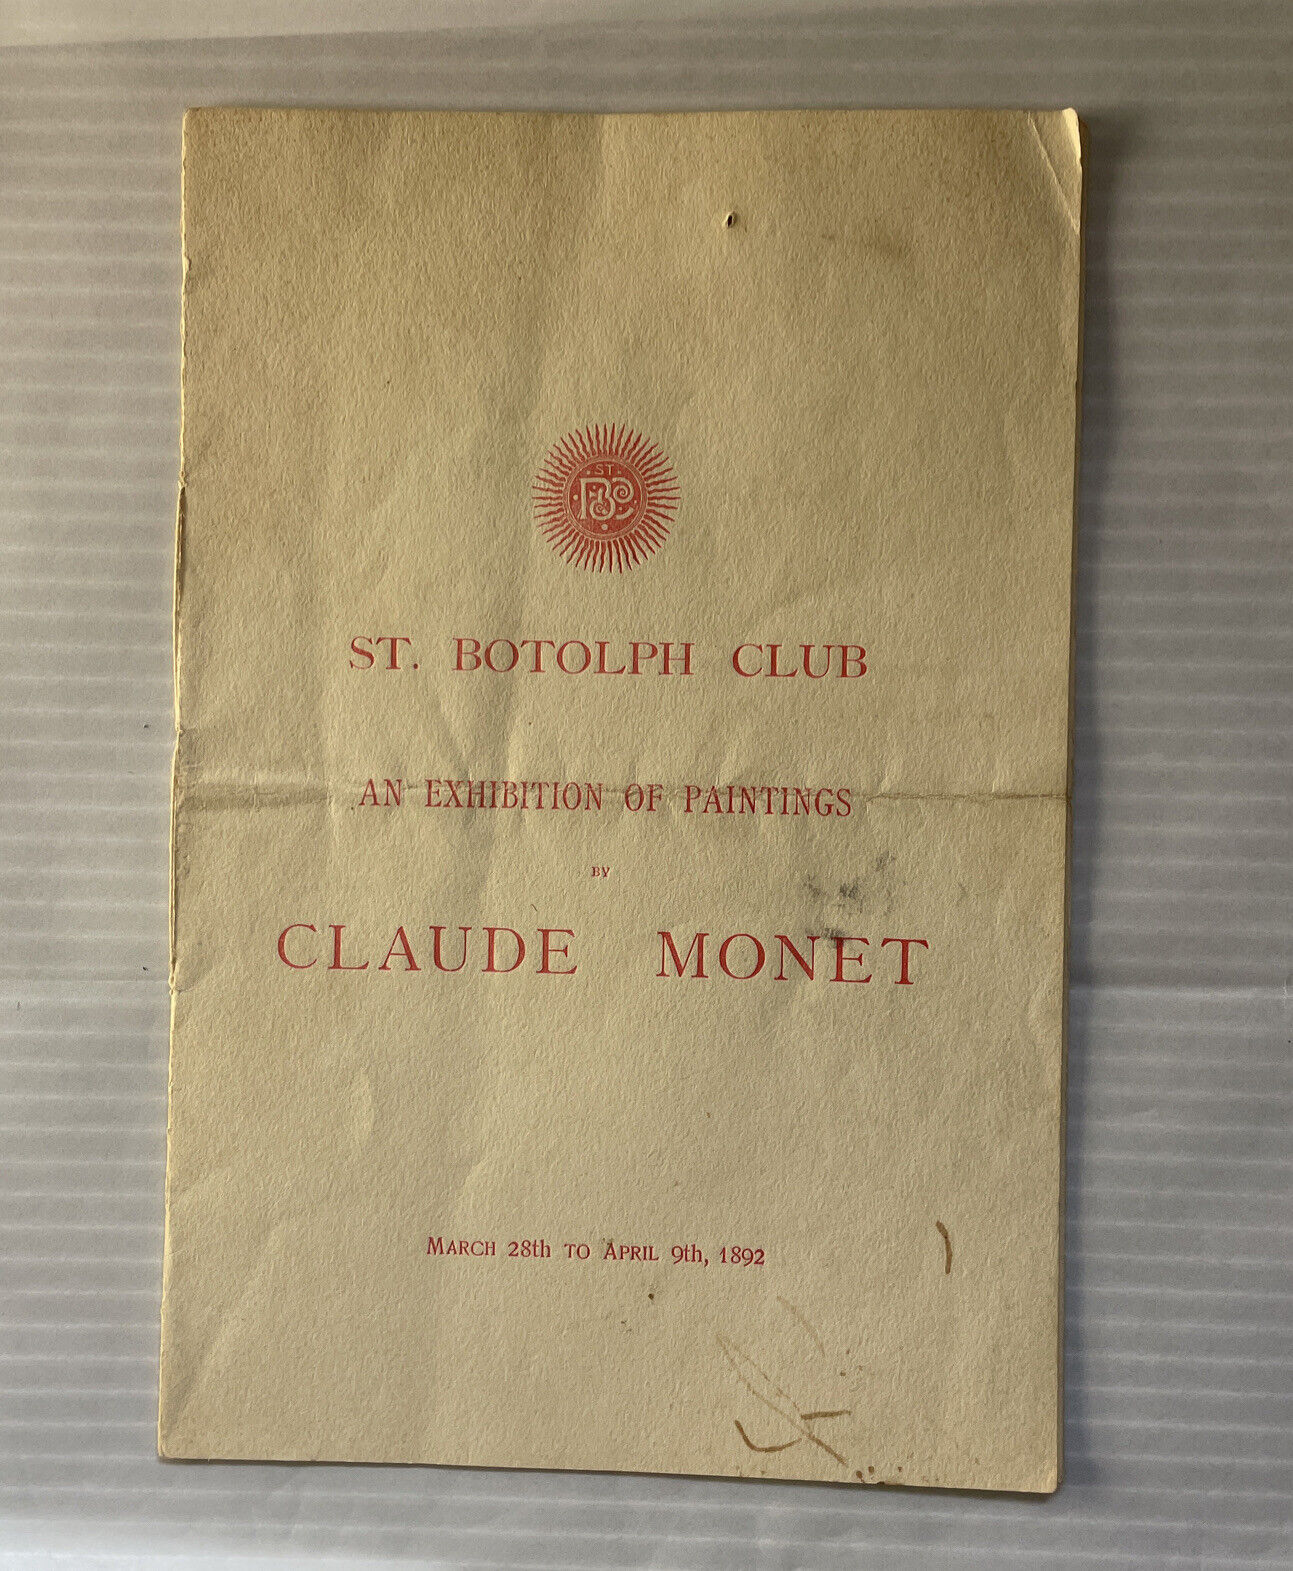 Exhibition Catalog of Paintings by Claude Monet - St. Botolph Club - Rare